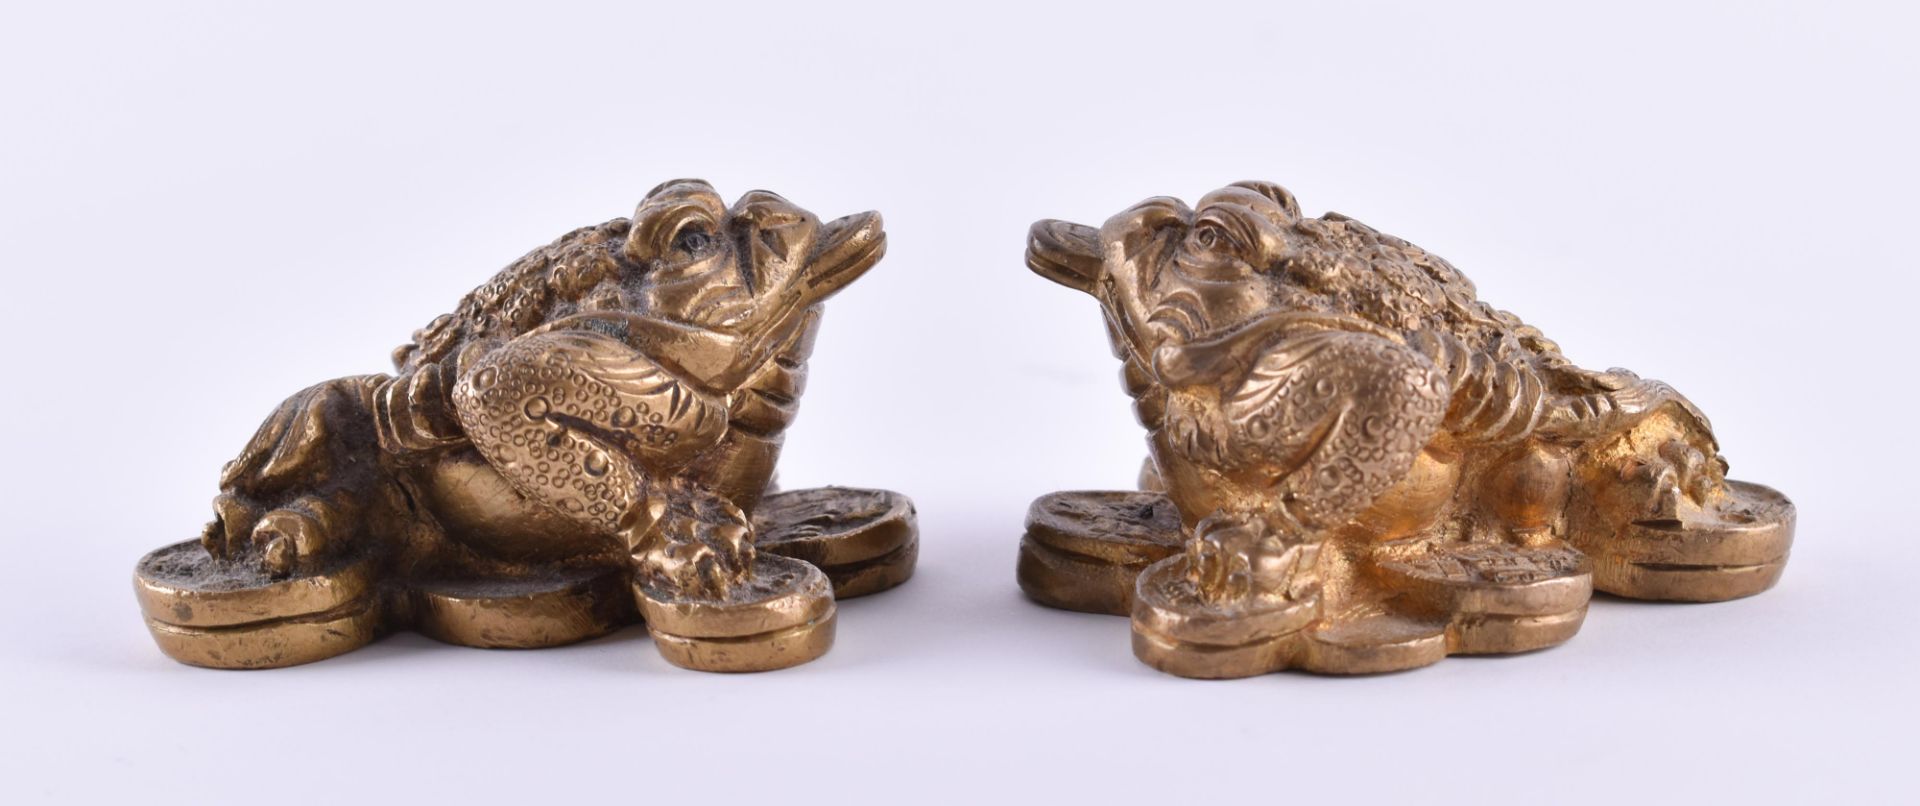 Anonymous artist of the 20th century"Two lizards"sculpture bronze, each 6 cm x 5 cm x 3.5 cmAnonymer